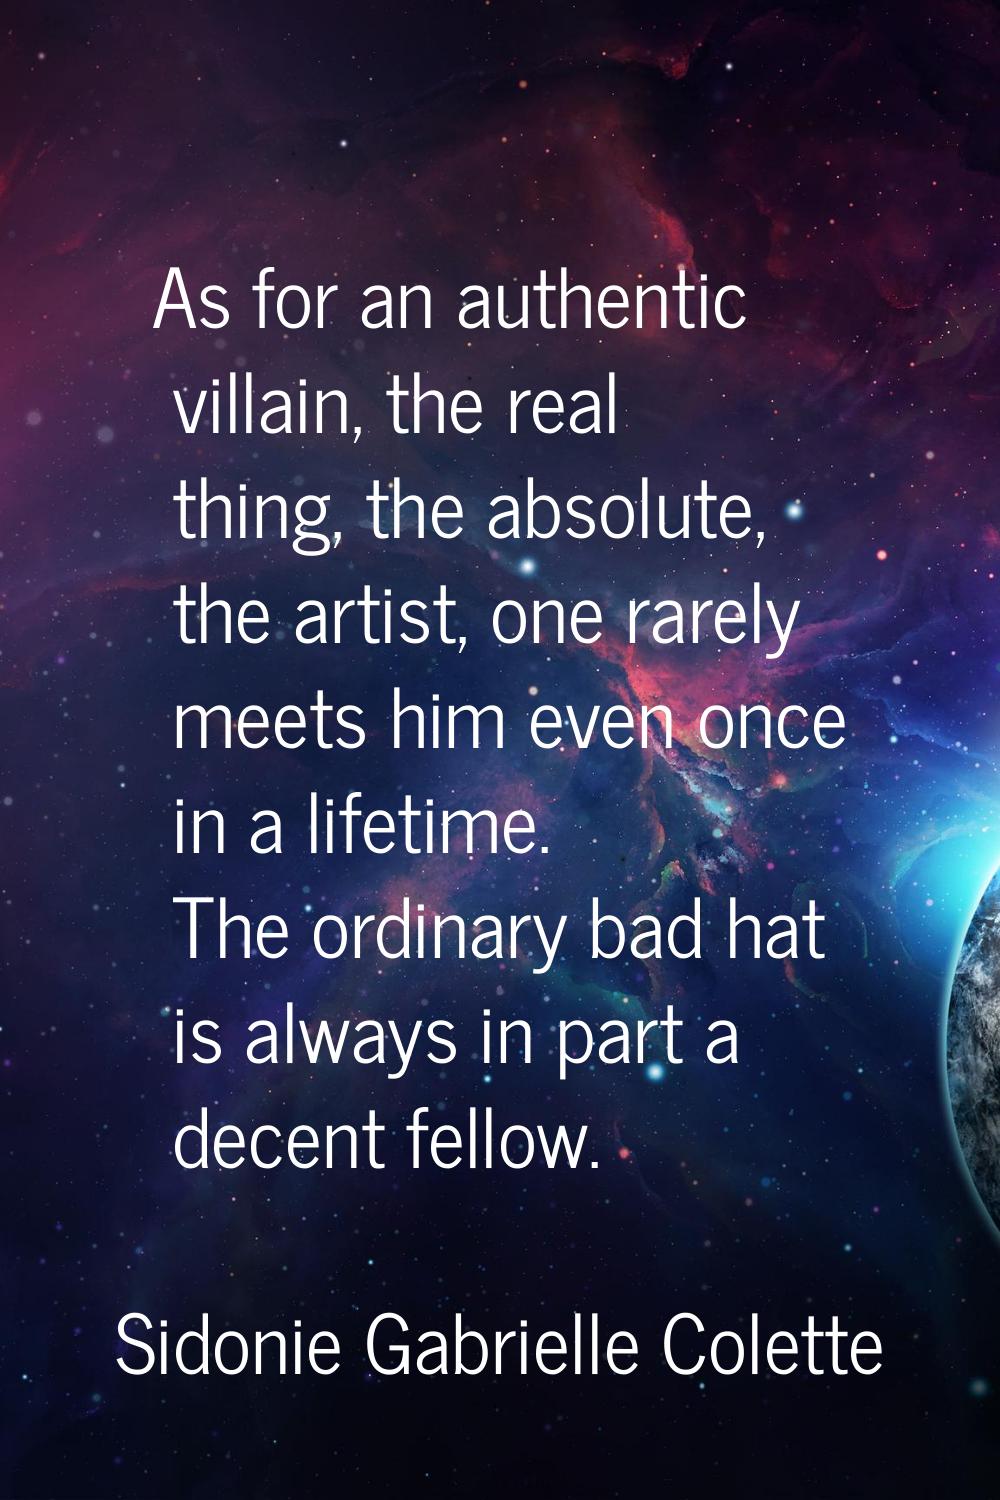 As for an authentic villain, the real thing, the absolute, the artist, one rarely meets him even on